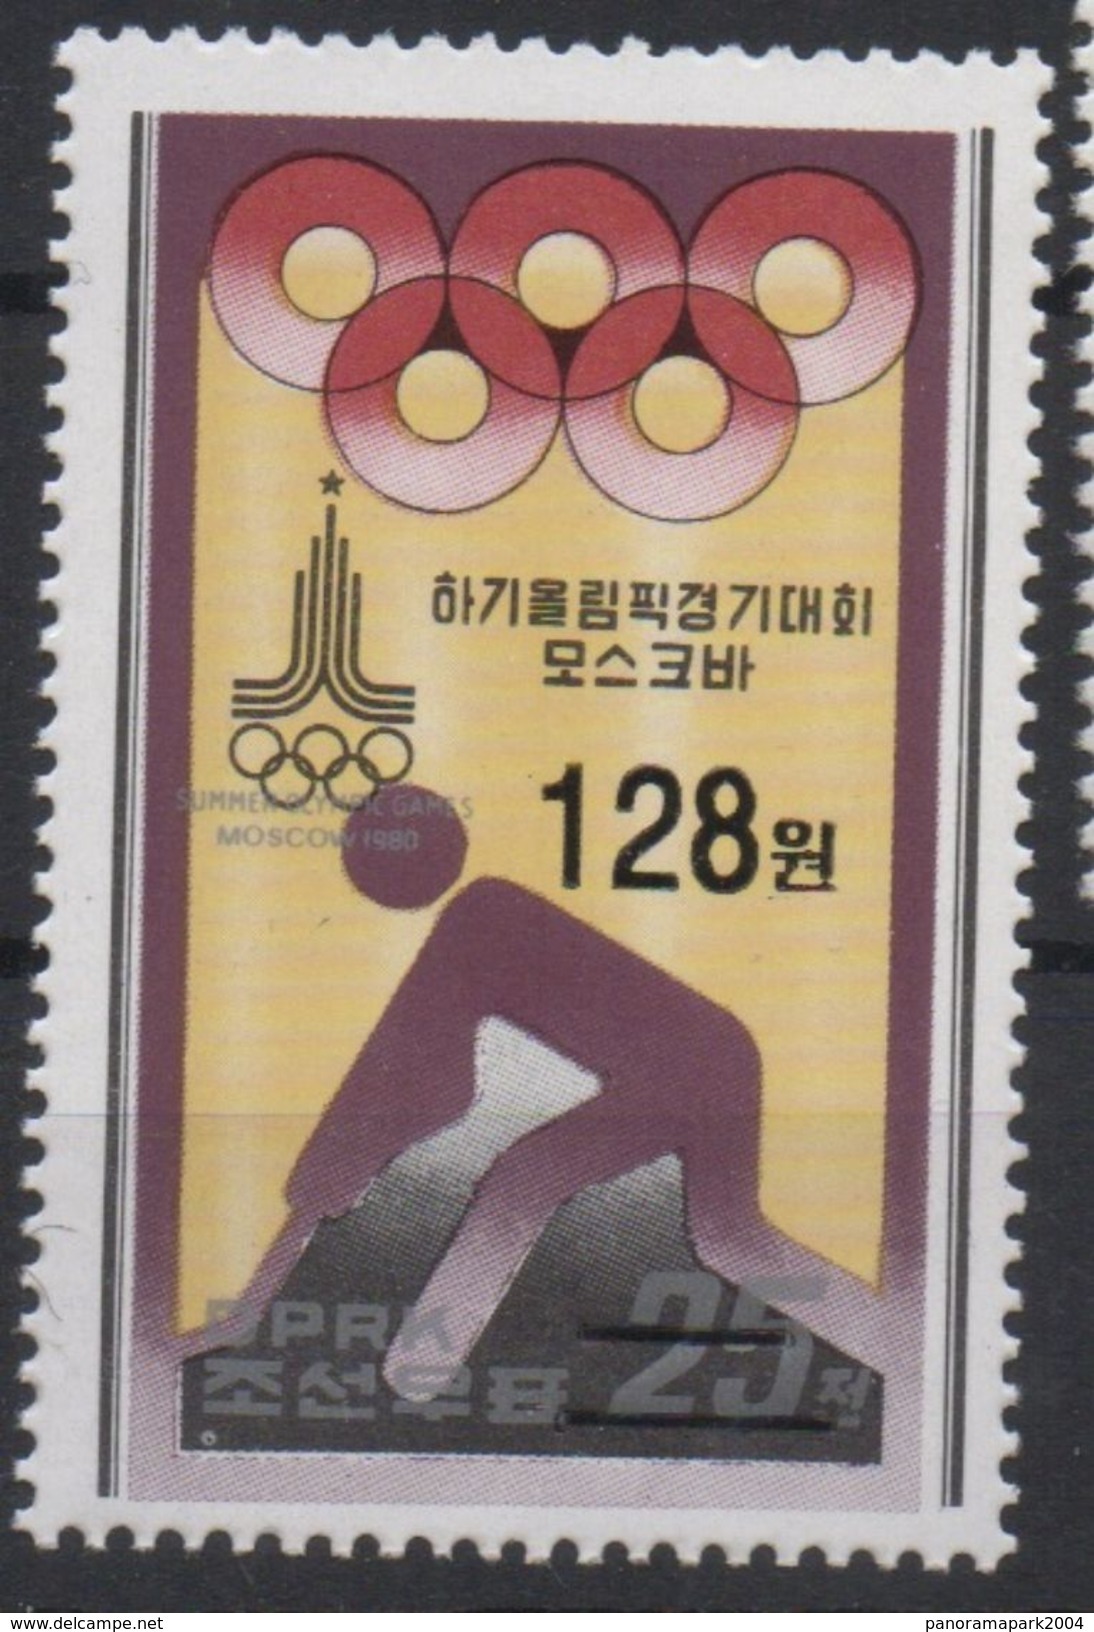 North Korea Corée Du Nord 2006 Mi. 5098 OVERPRINT Olympic Games Jeux Olympiques MOSCOW MOSCOU 1980 MOSKAU MNH** Olympia - Summer 1980: Moscow